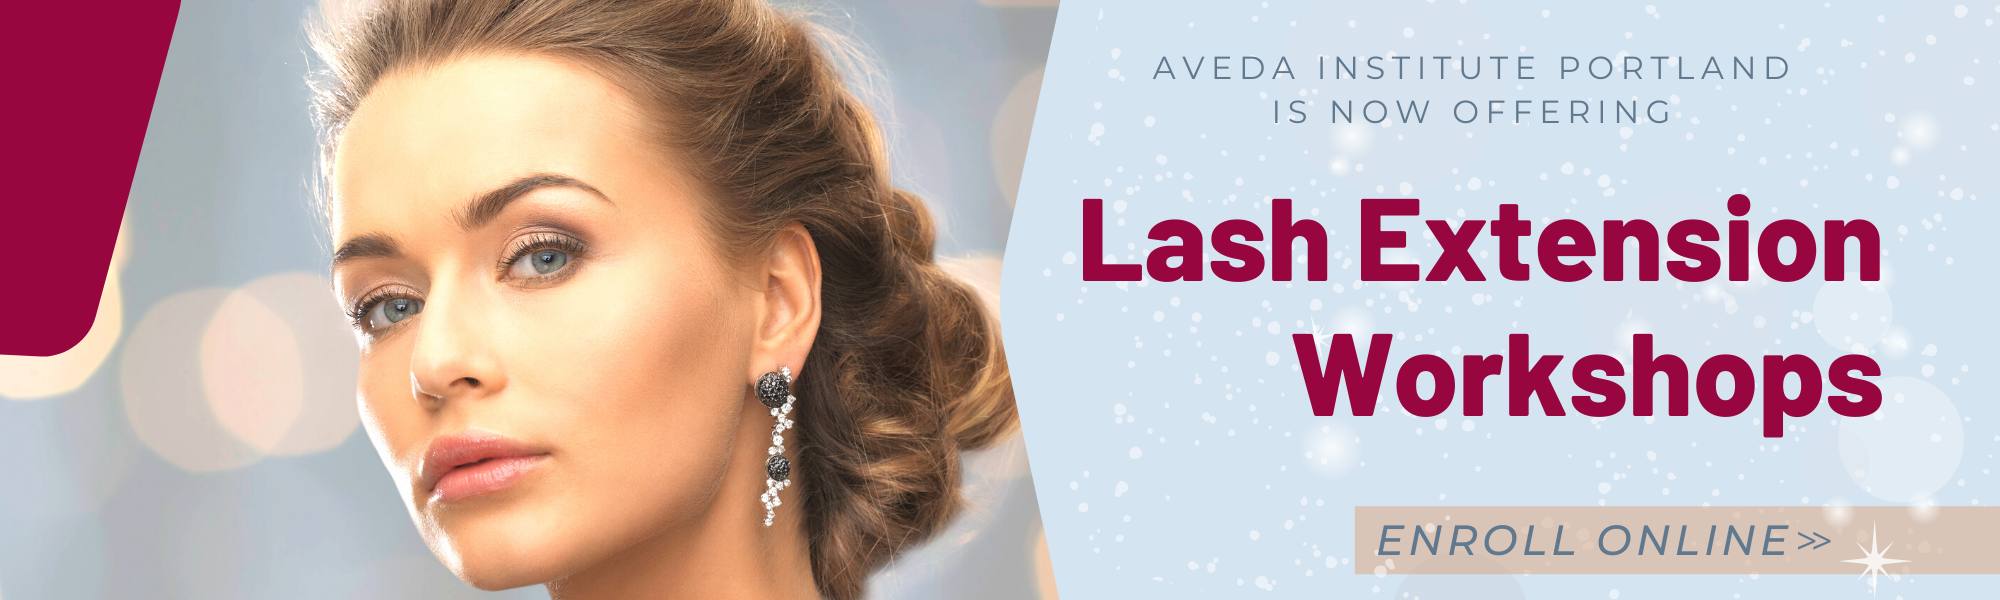 Enroll now online for Aveda Institute Portland's Lash Extension Workshop. Holiday glam look with beautiful lashes.